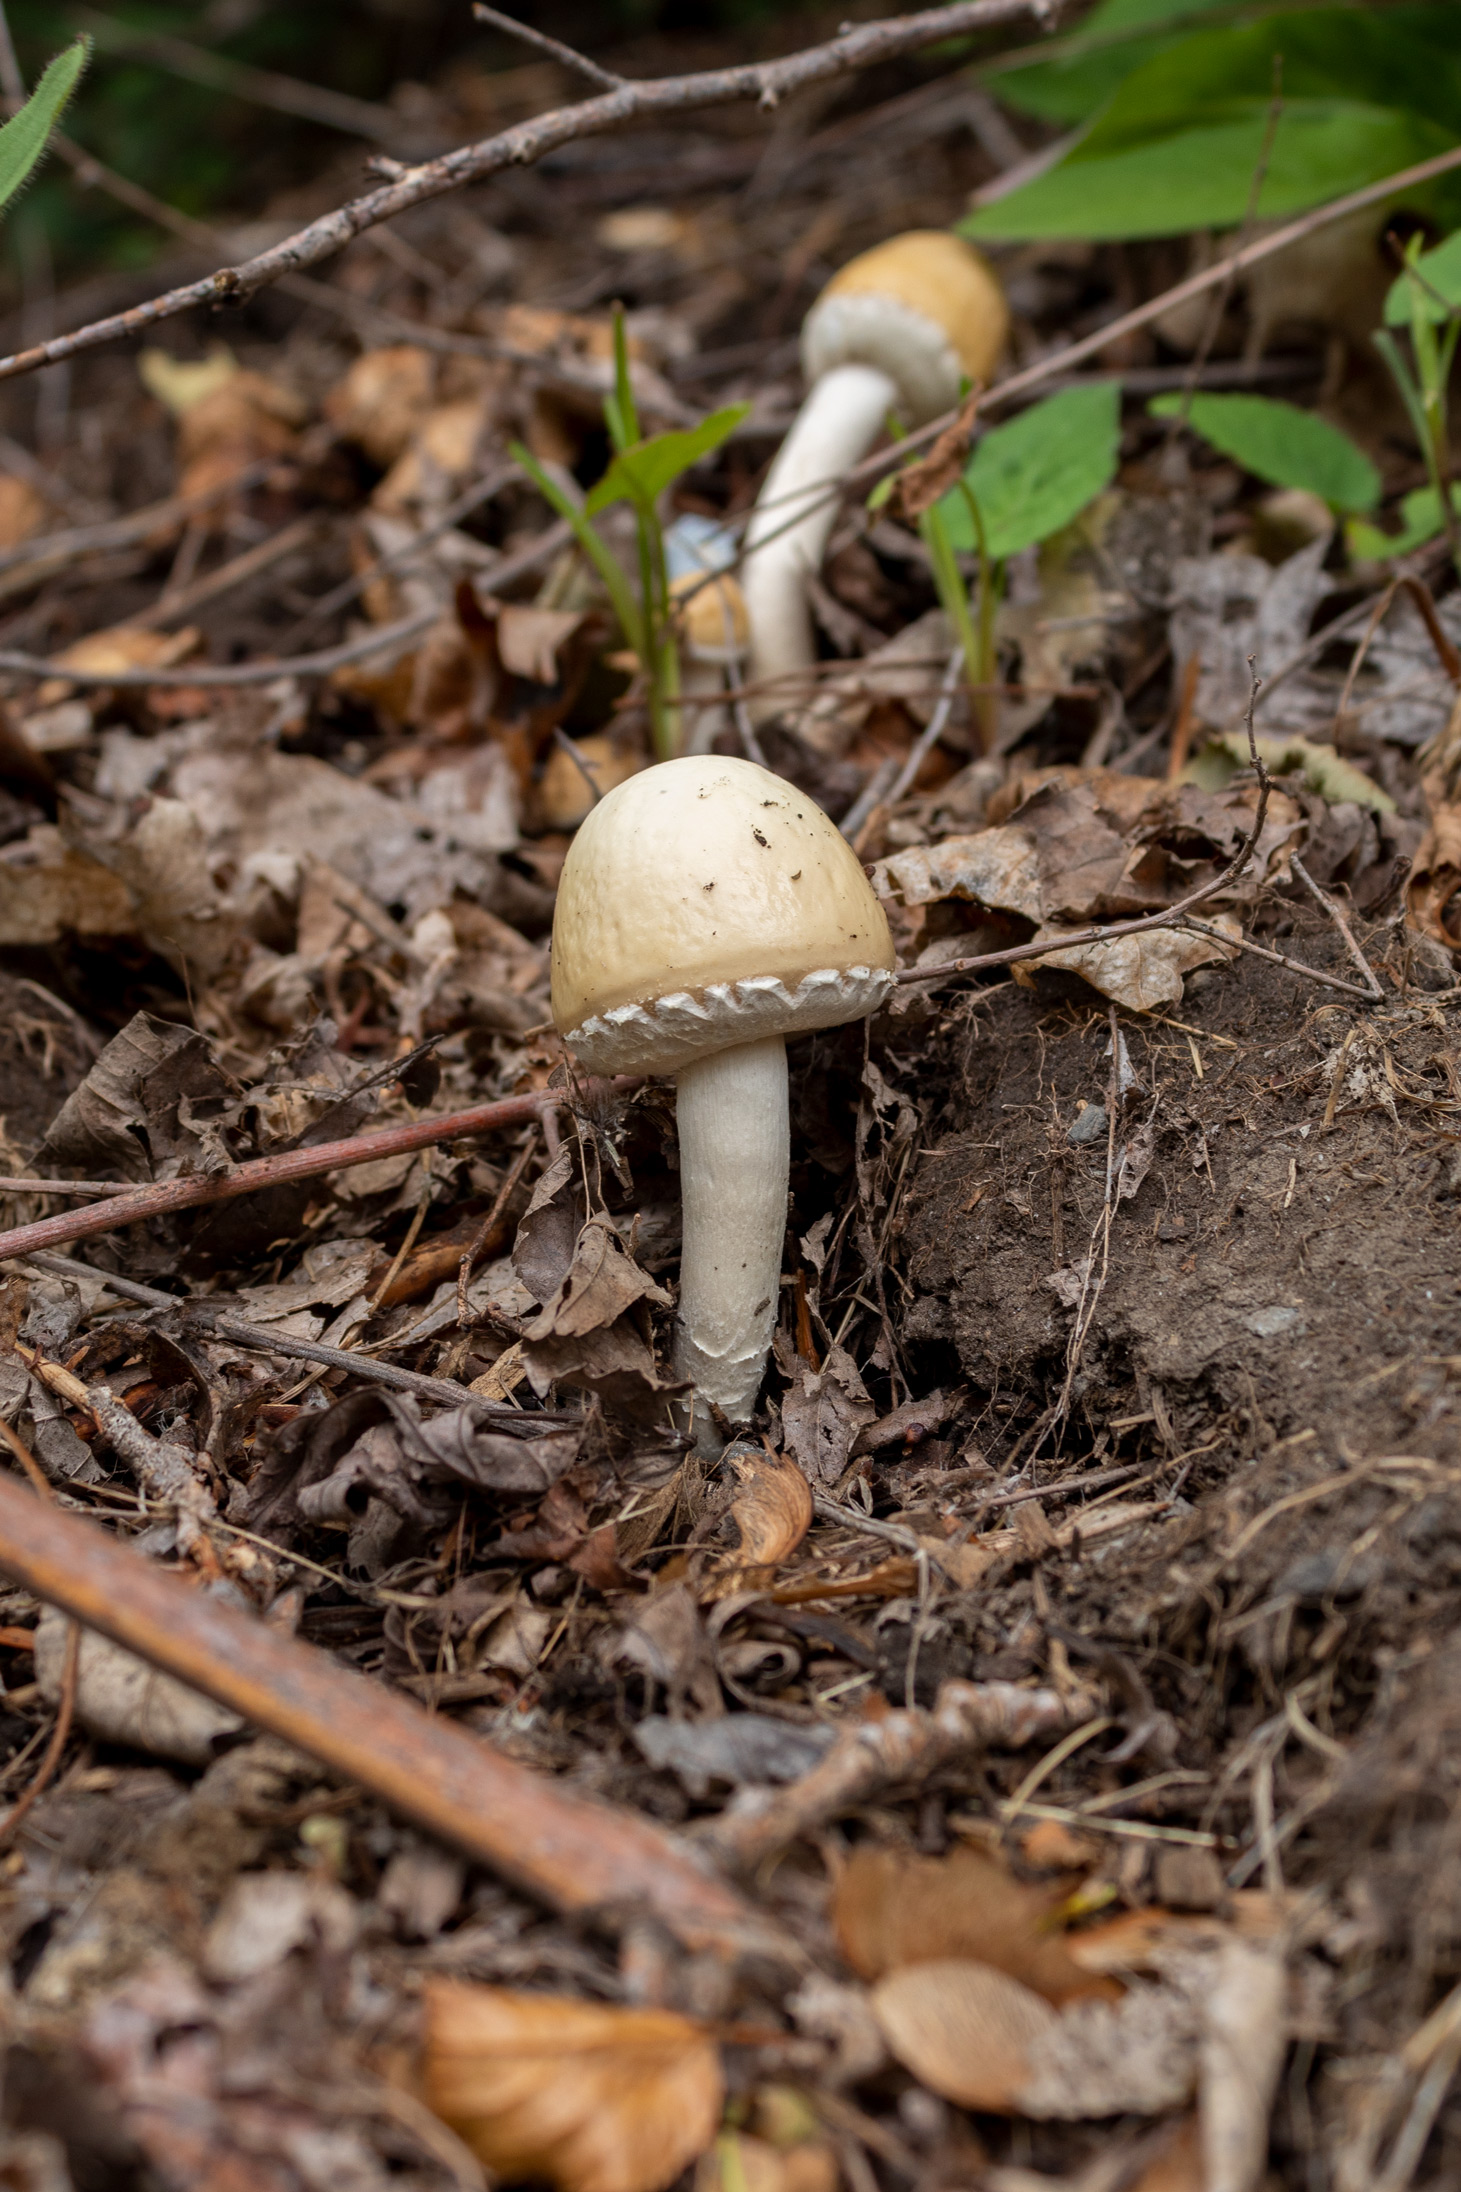 Mushroom sprouting out of the ground